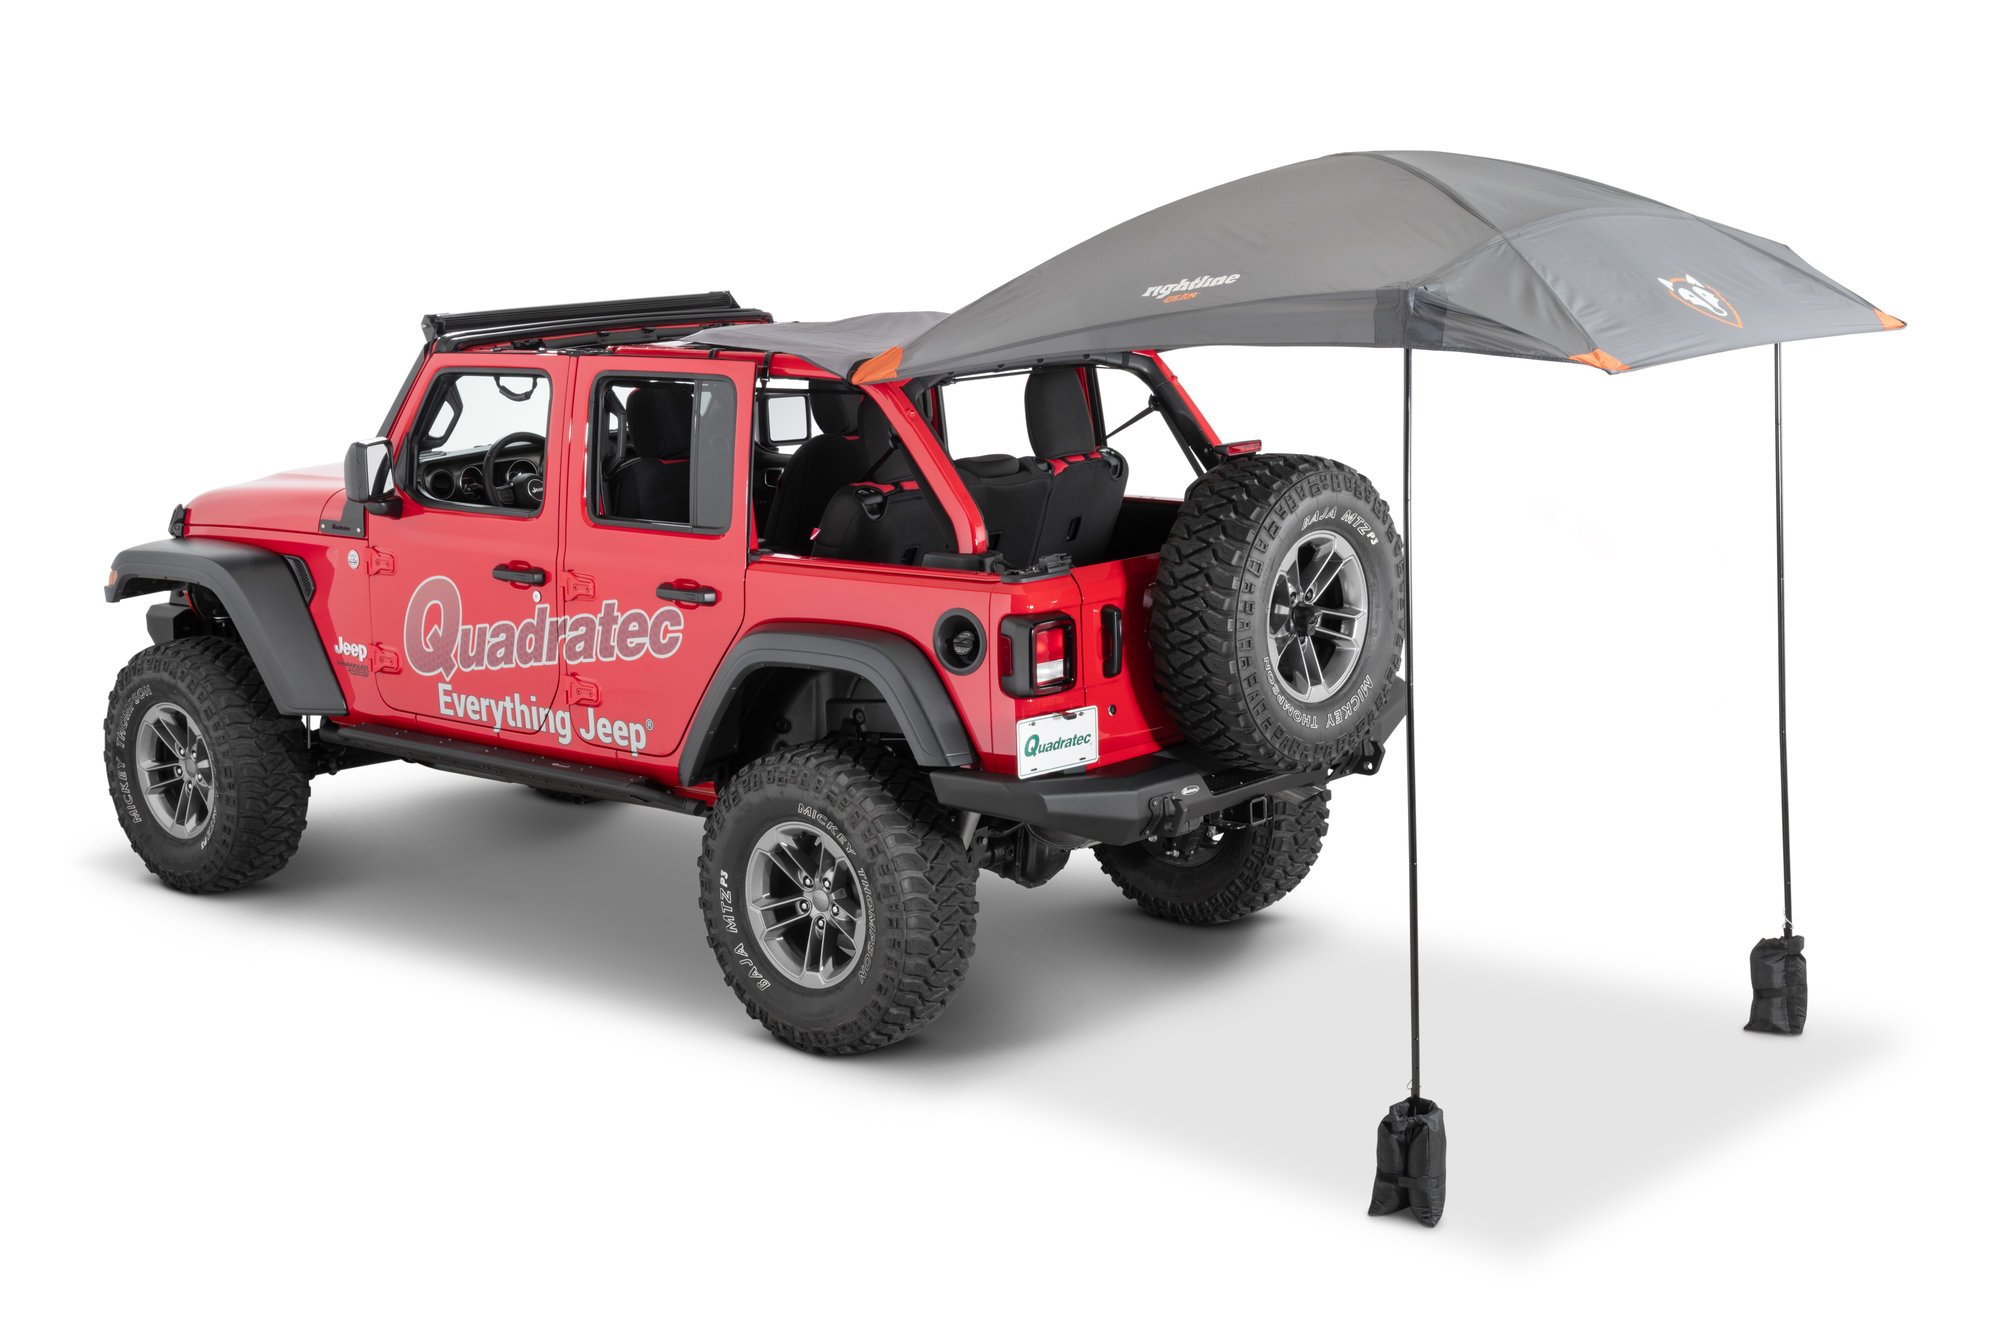 Offroad Accessories for Overlanding - Jeeps, Trucks, SUVs